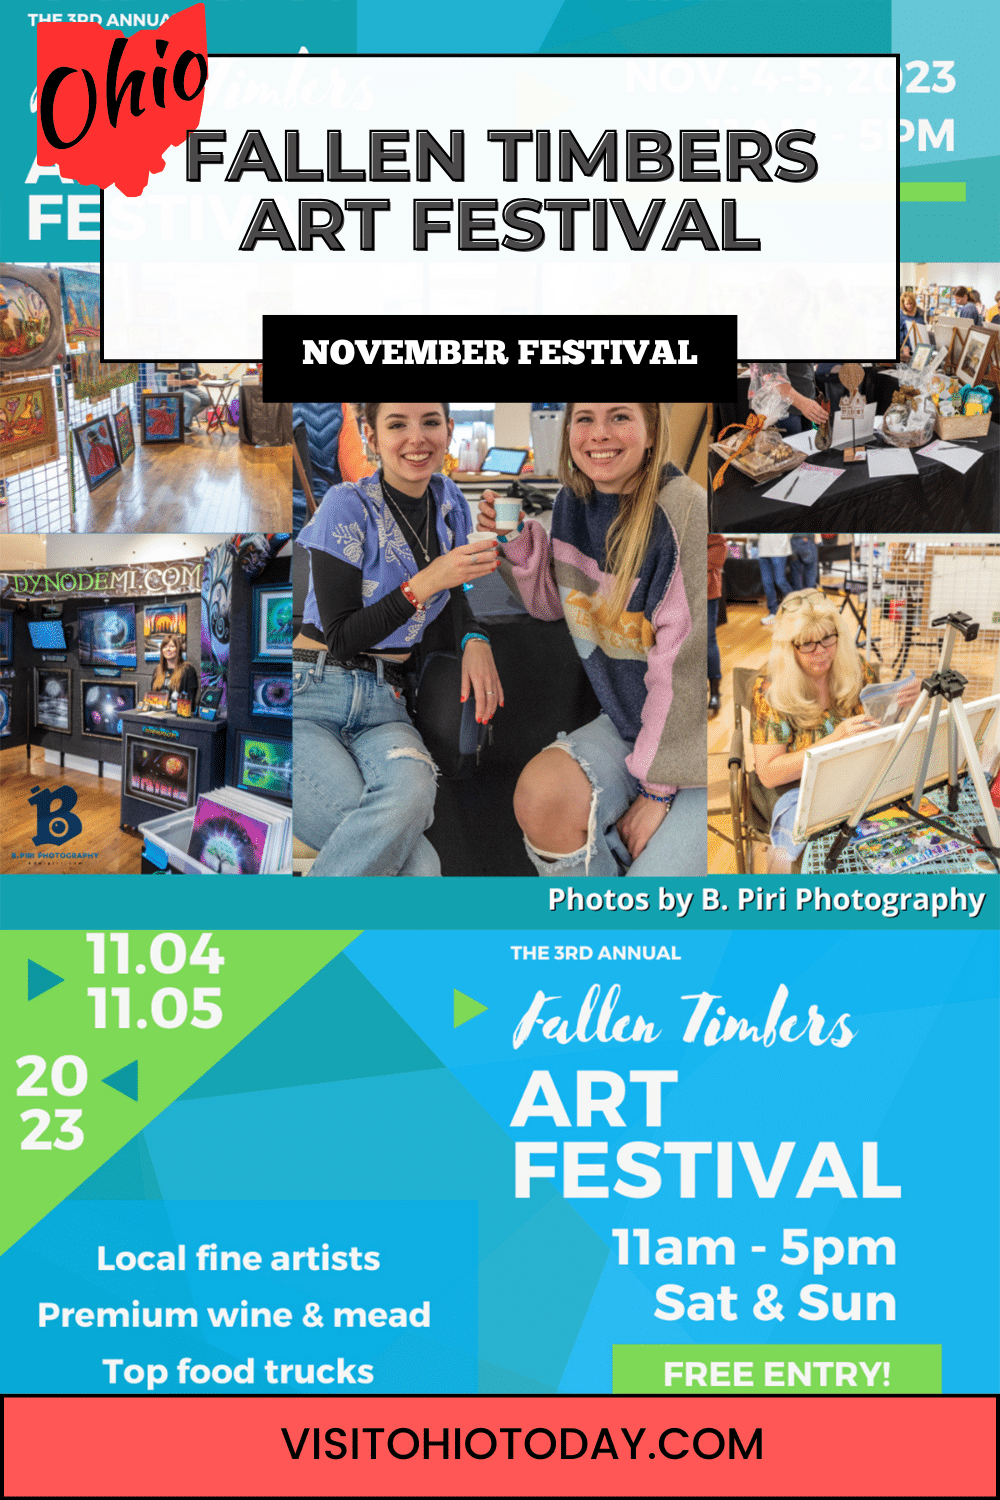 Fallen Timbers Art Festival takes place at The Shops at Fallen Timbers in Maumee. A weekend of art and entertainment, November 4-5, 2023.